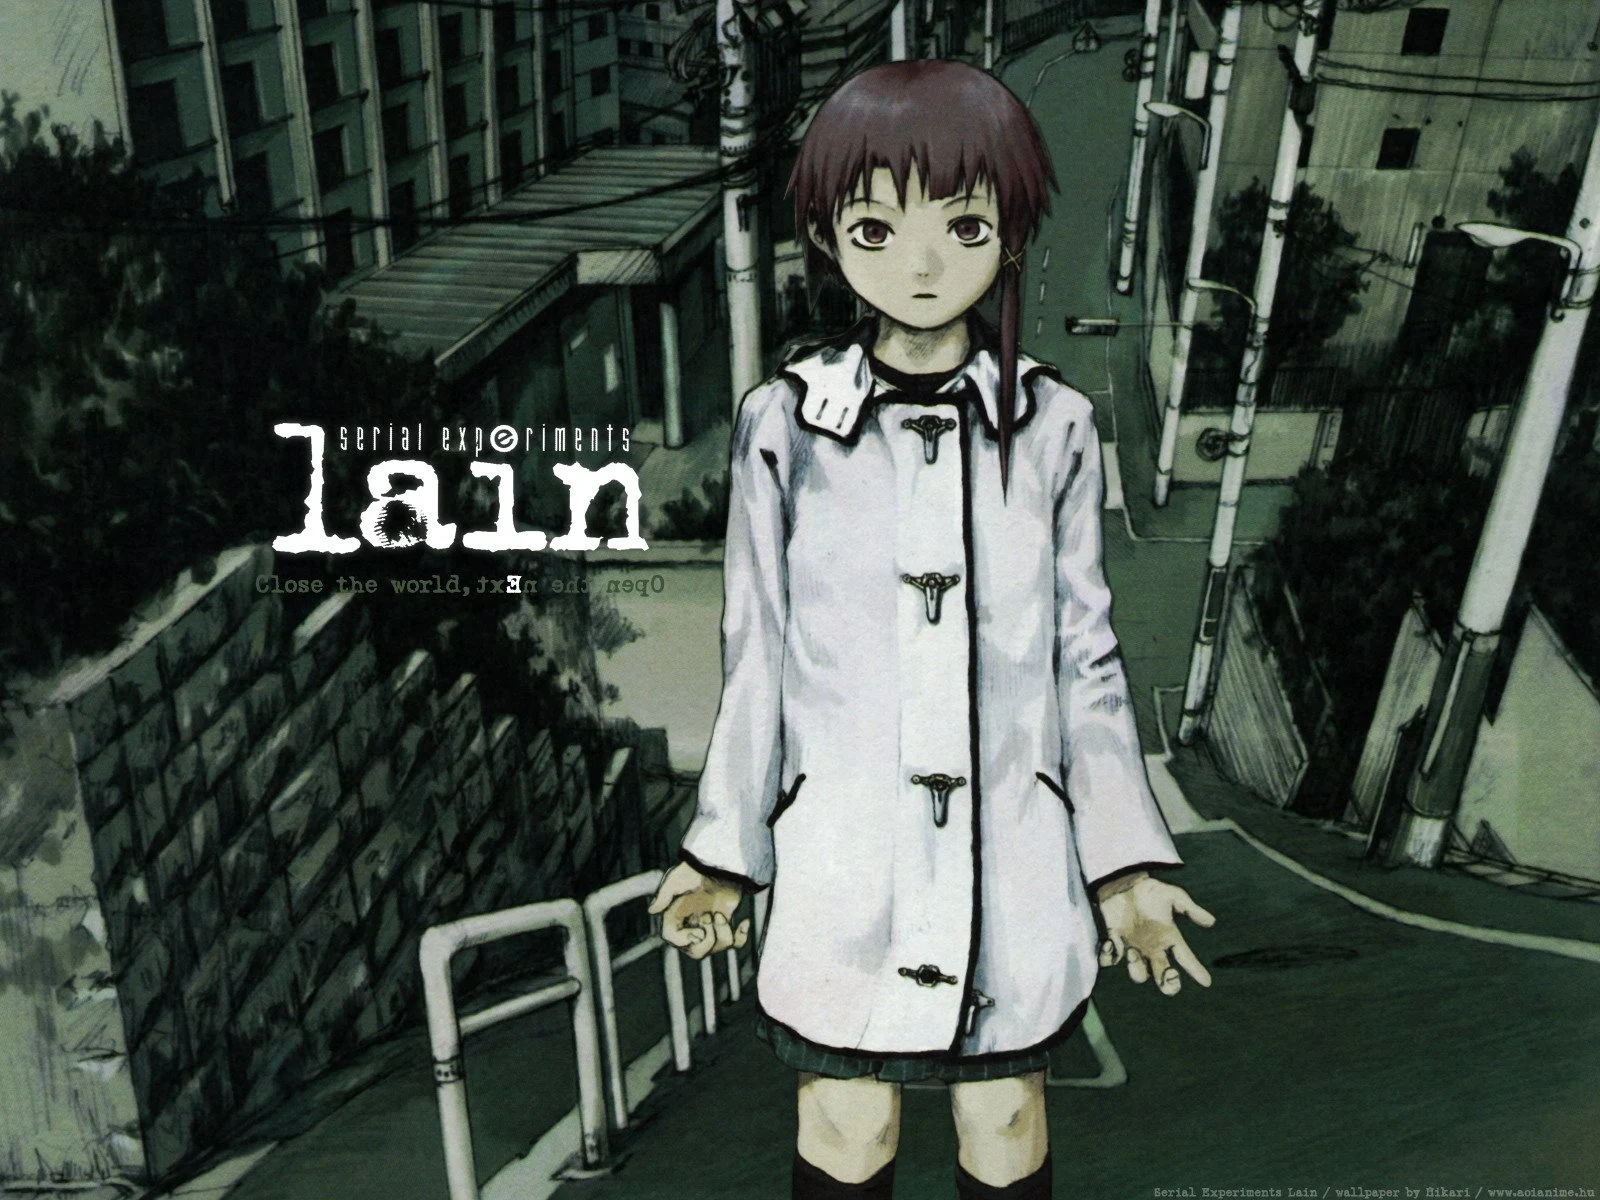 Best Serial Experiments Lain Picture